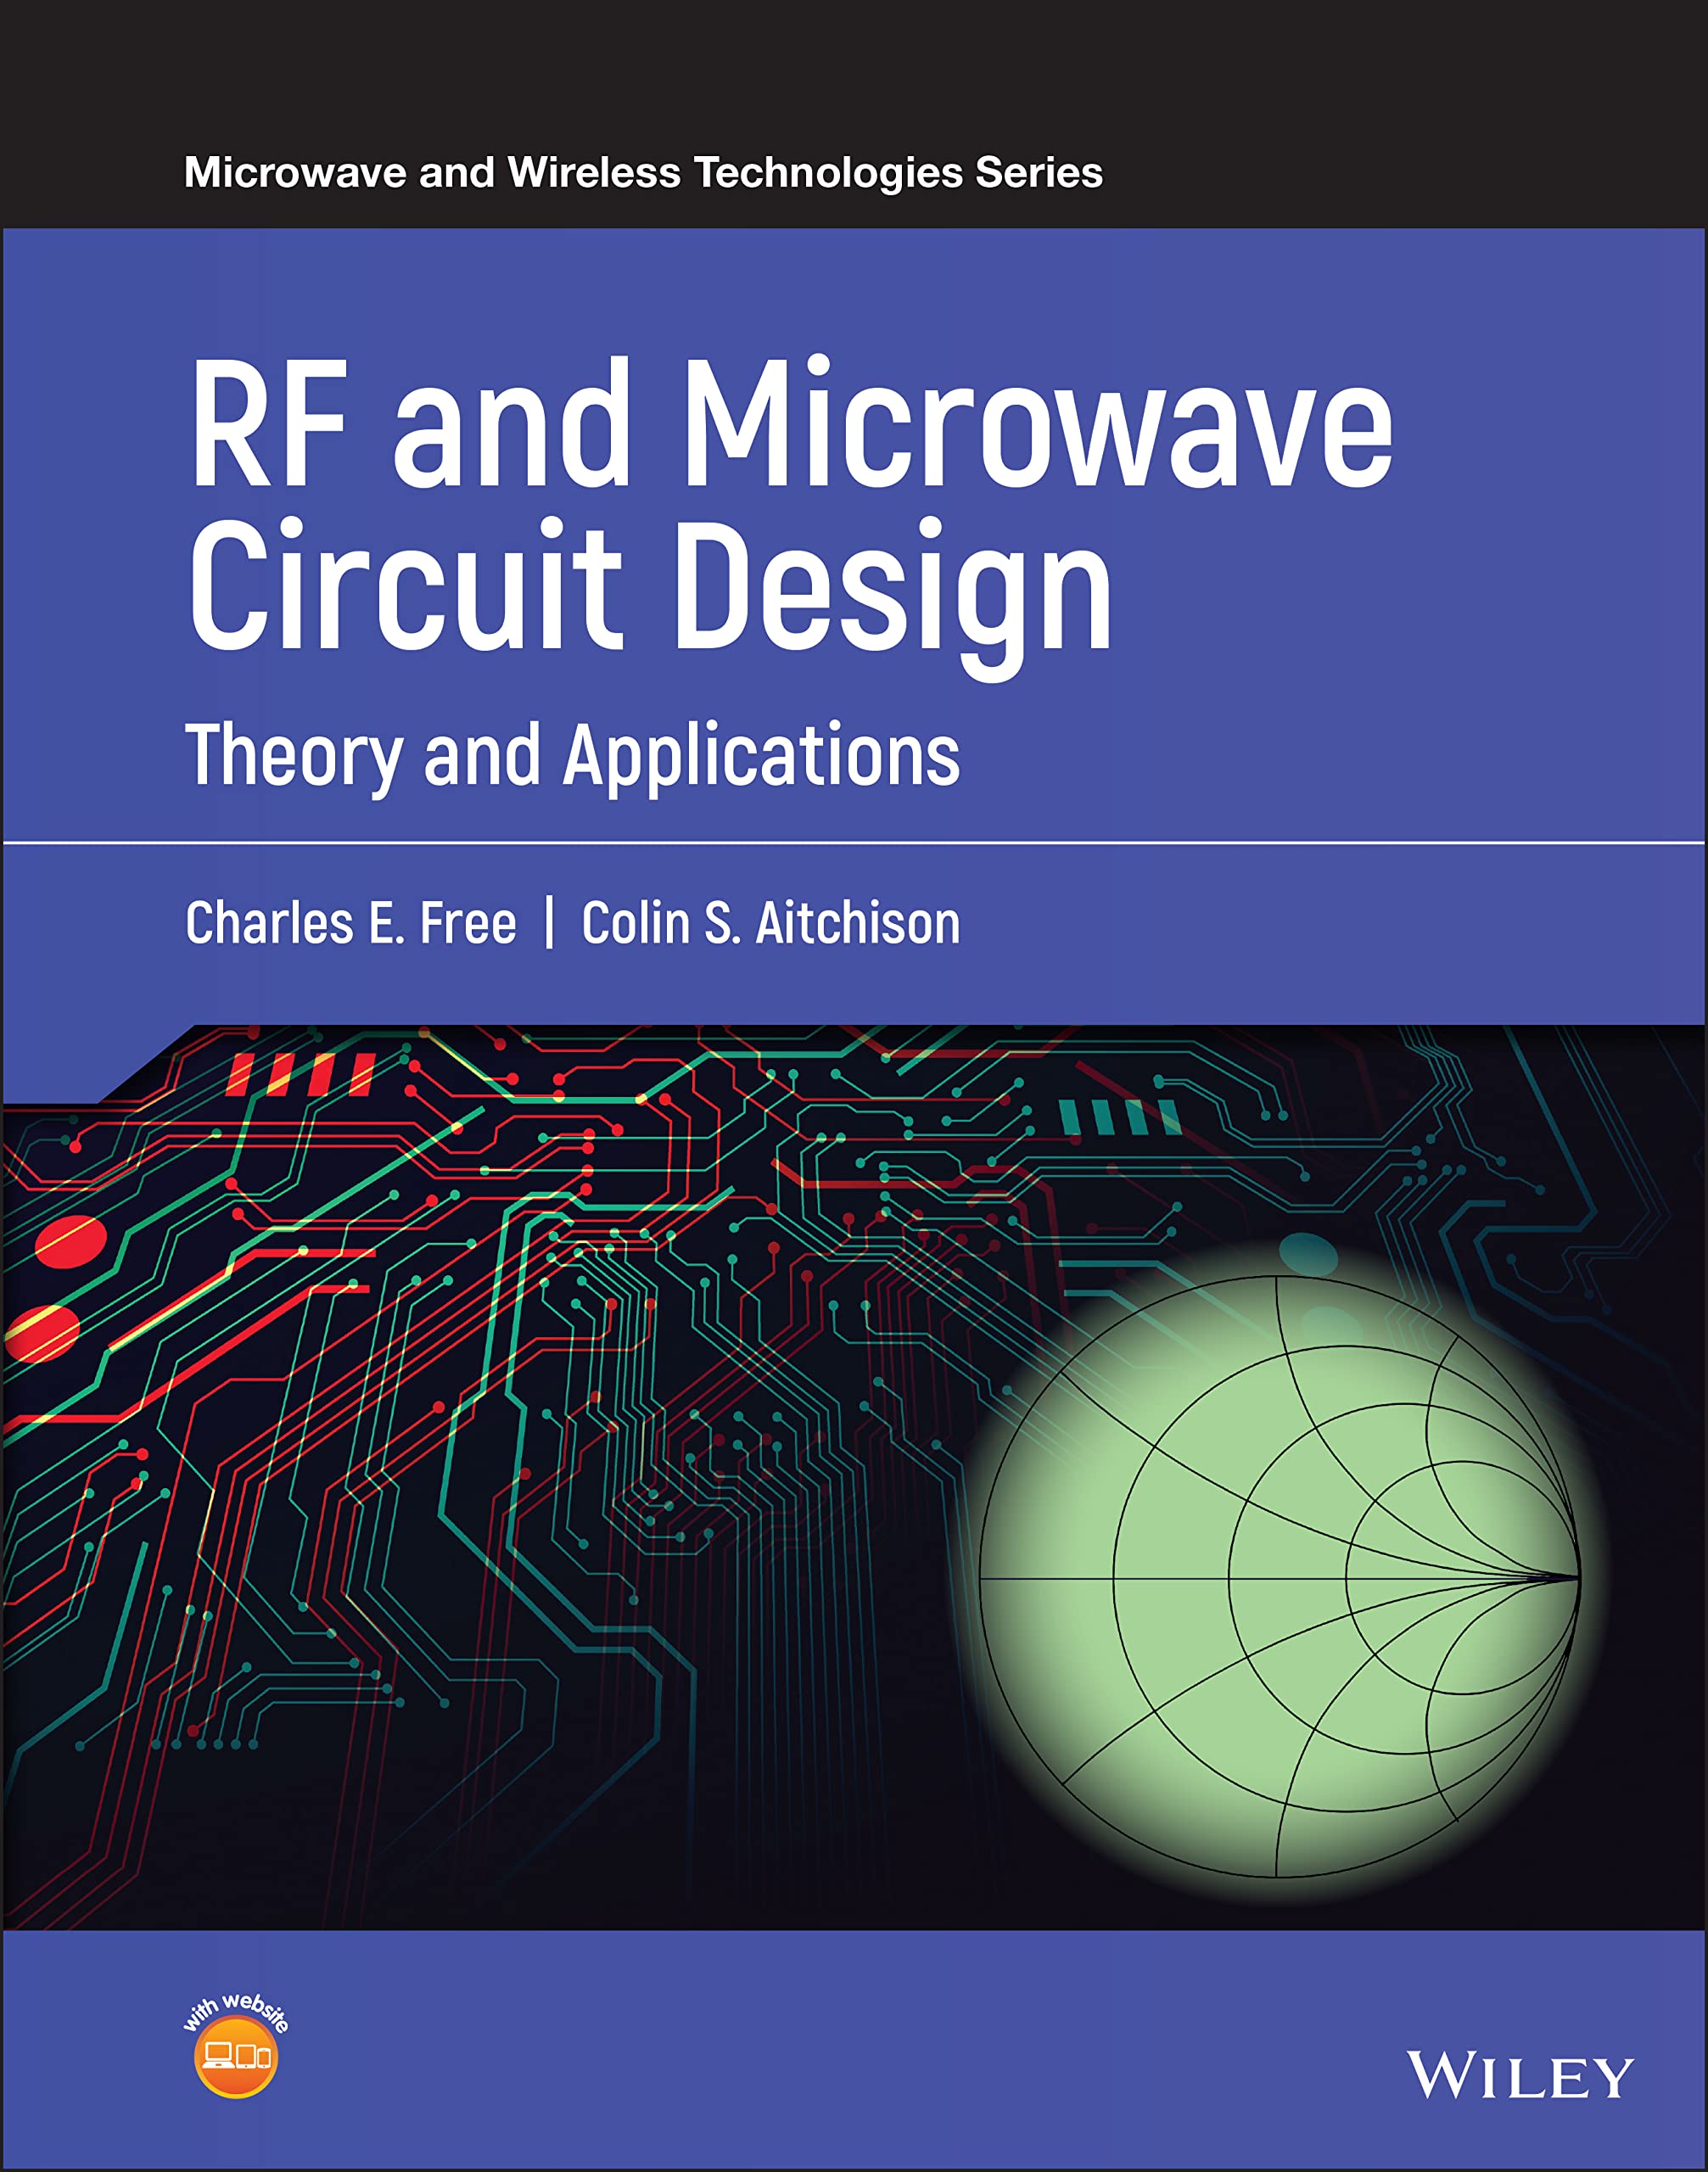 RF and Microwave Circuit Design (Hardcover)